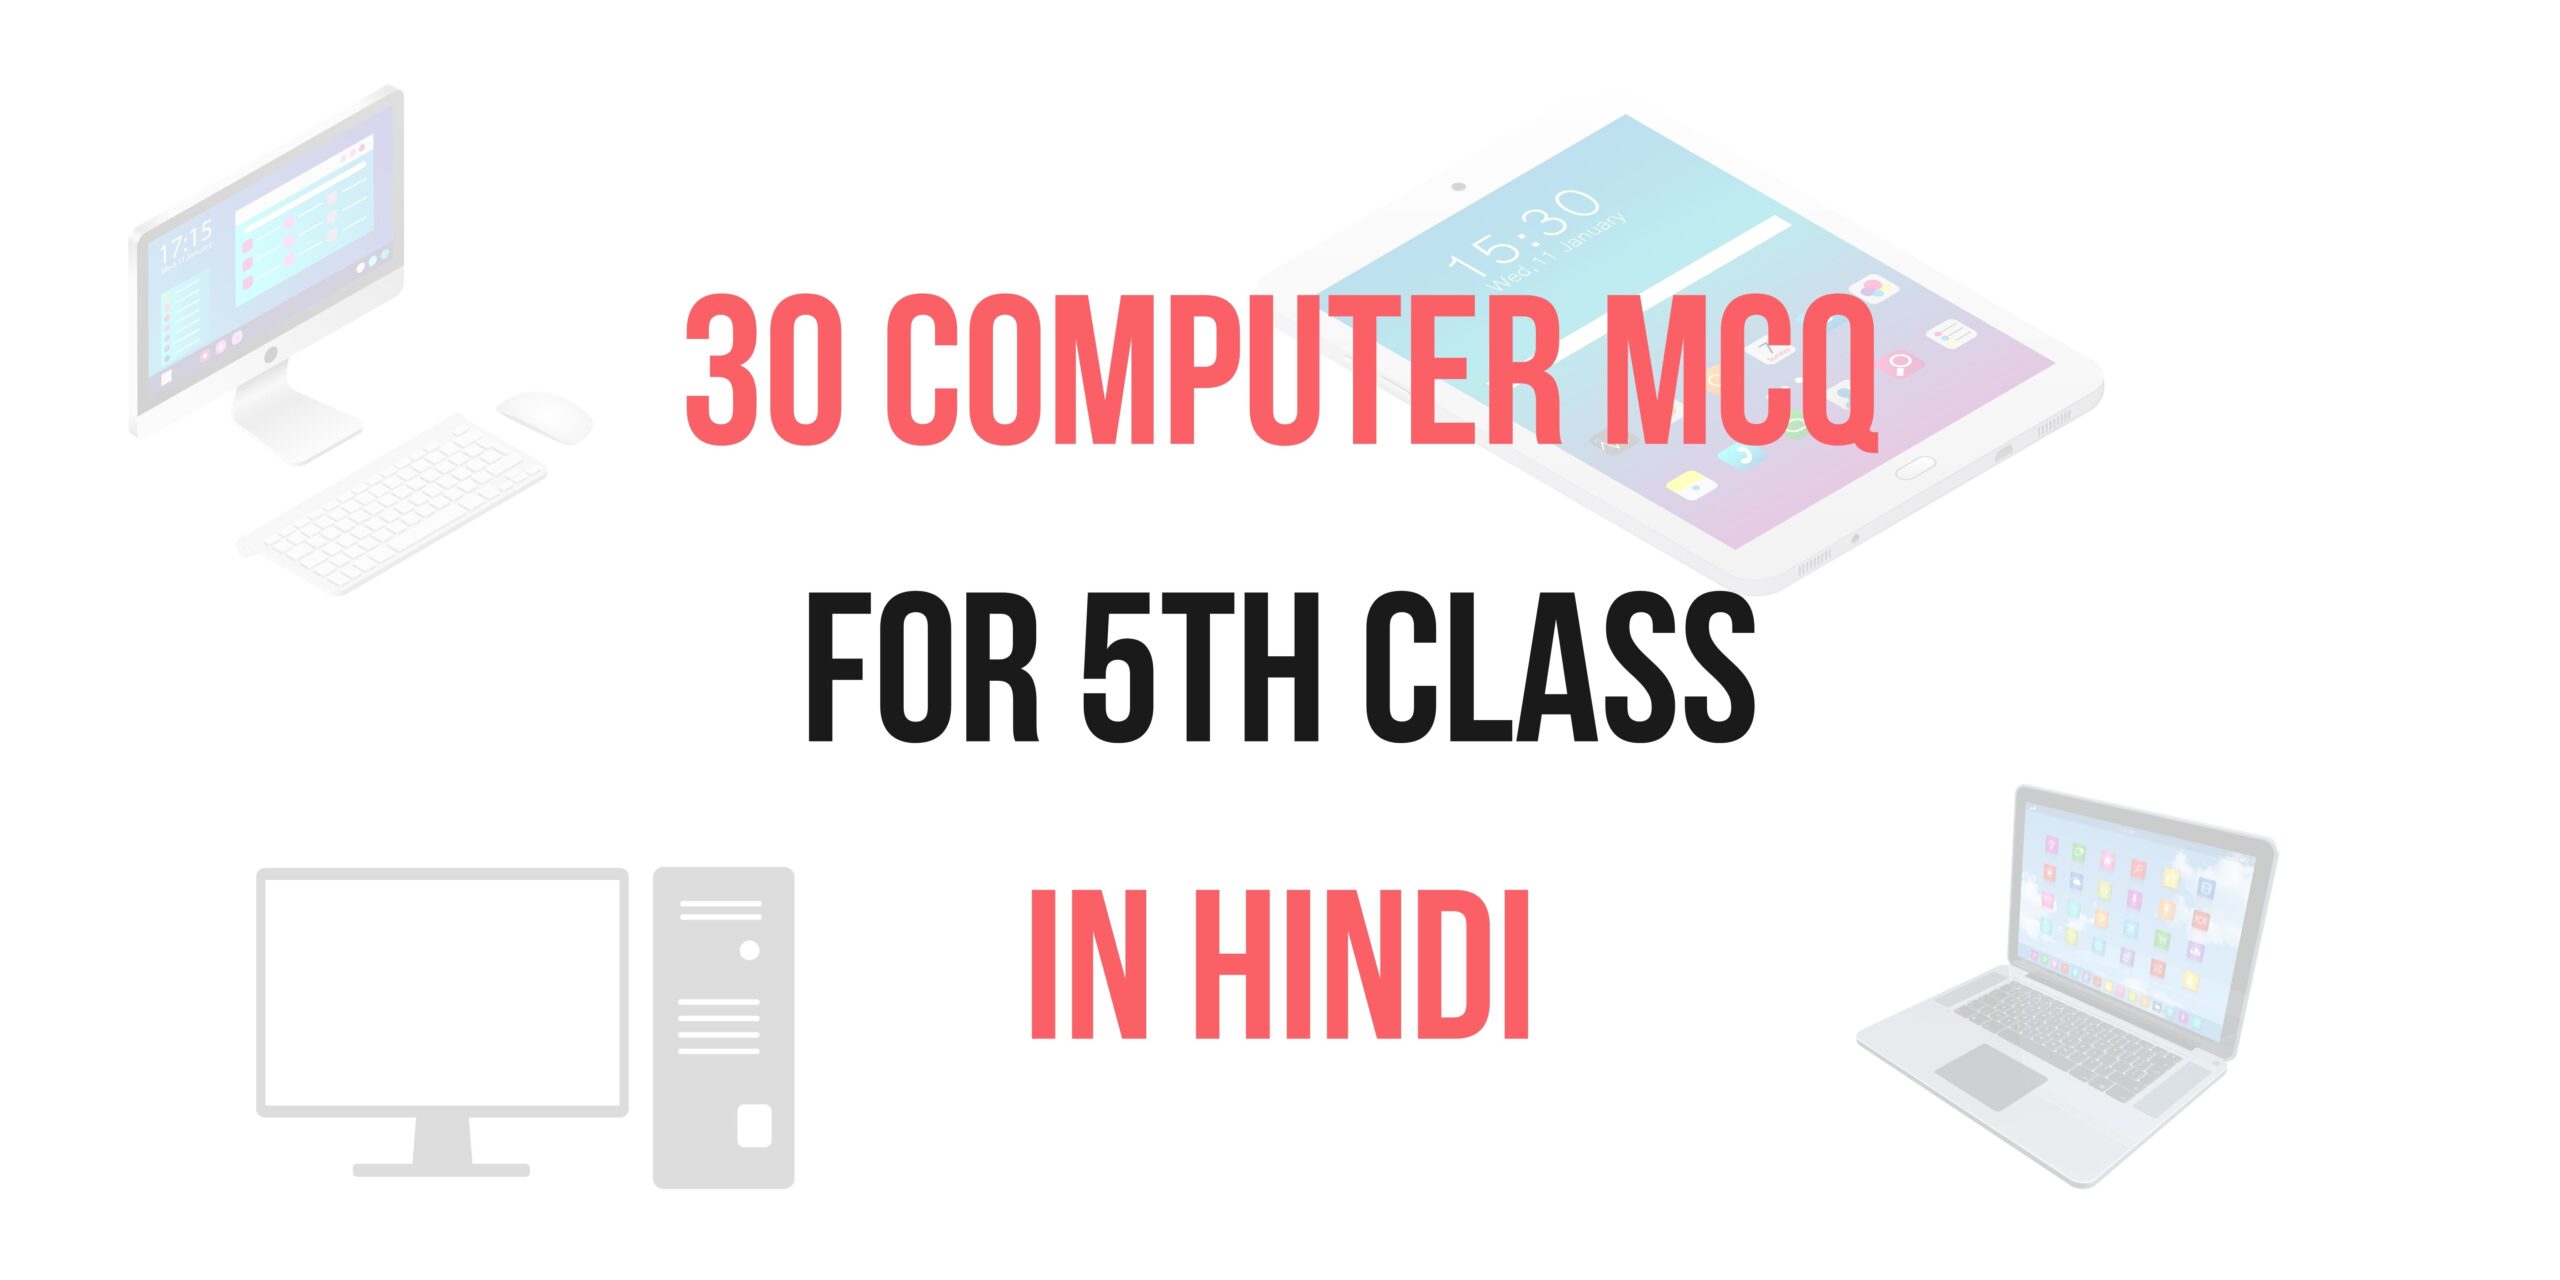 30 Computer MCQ for 5th class in Hindi